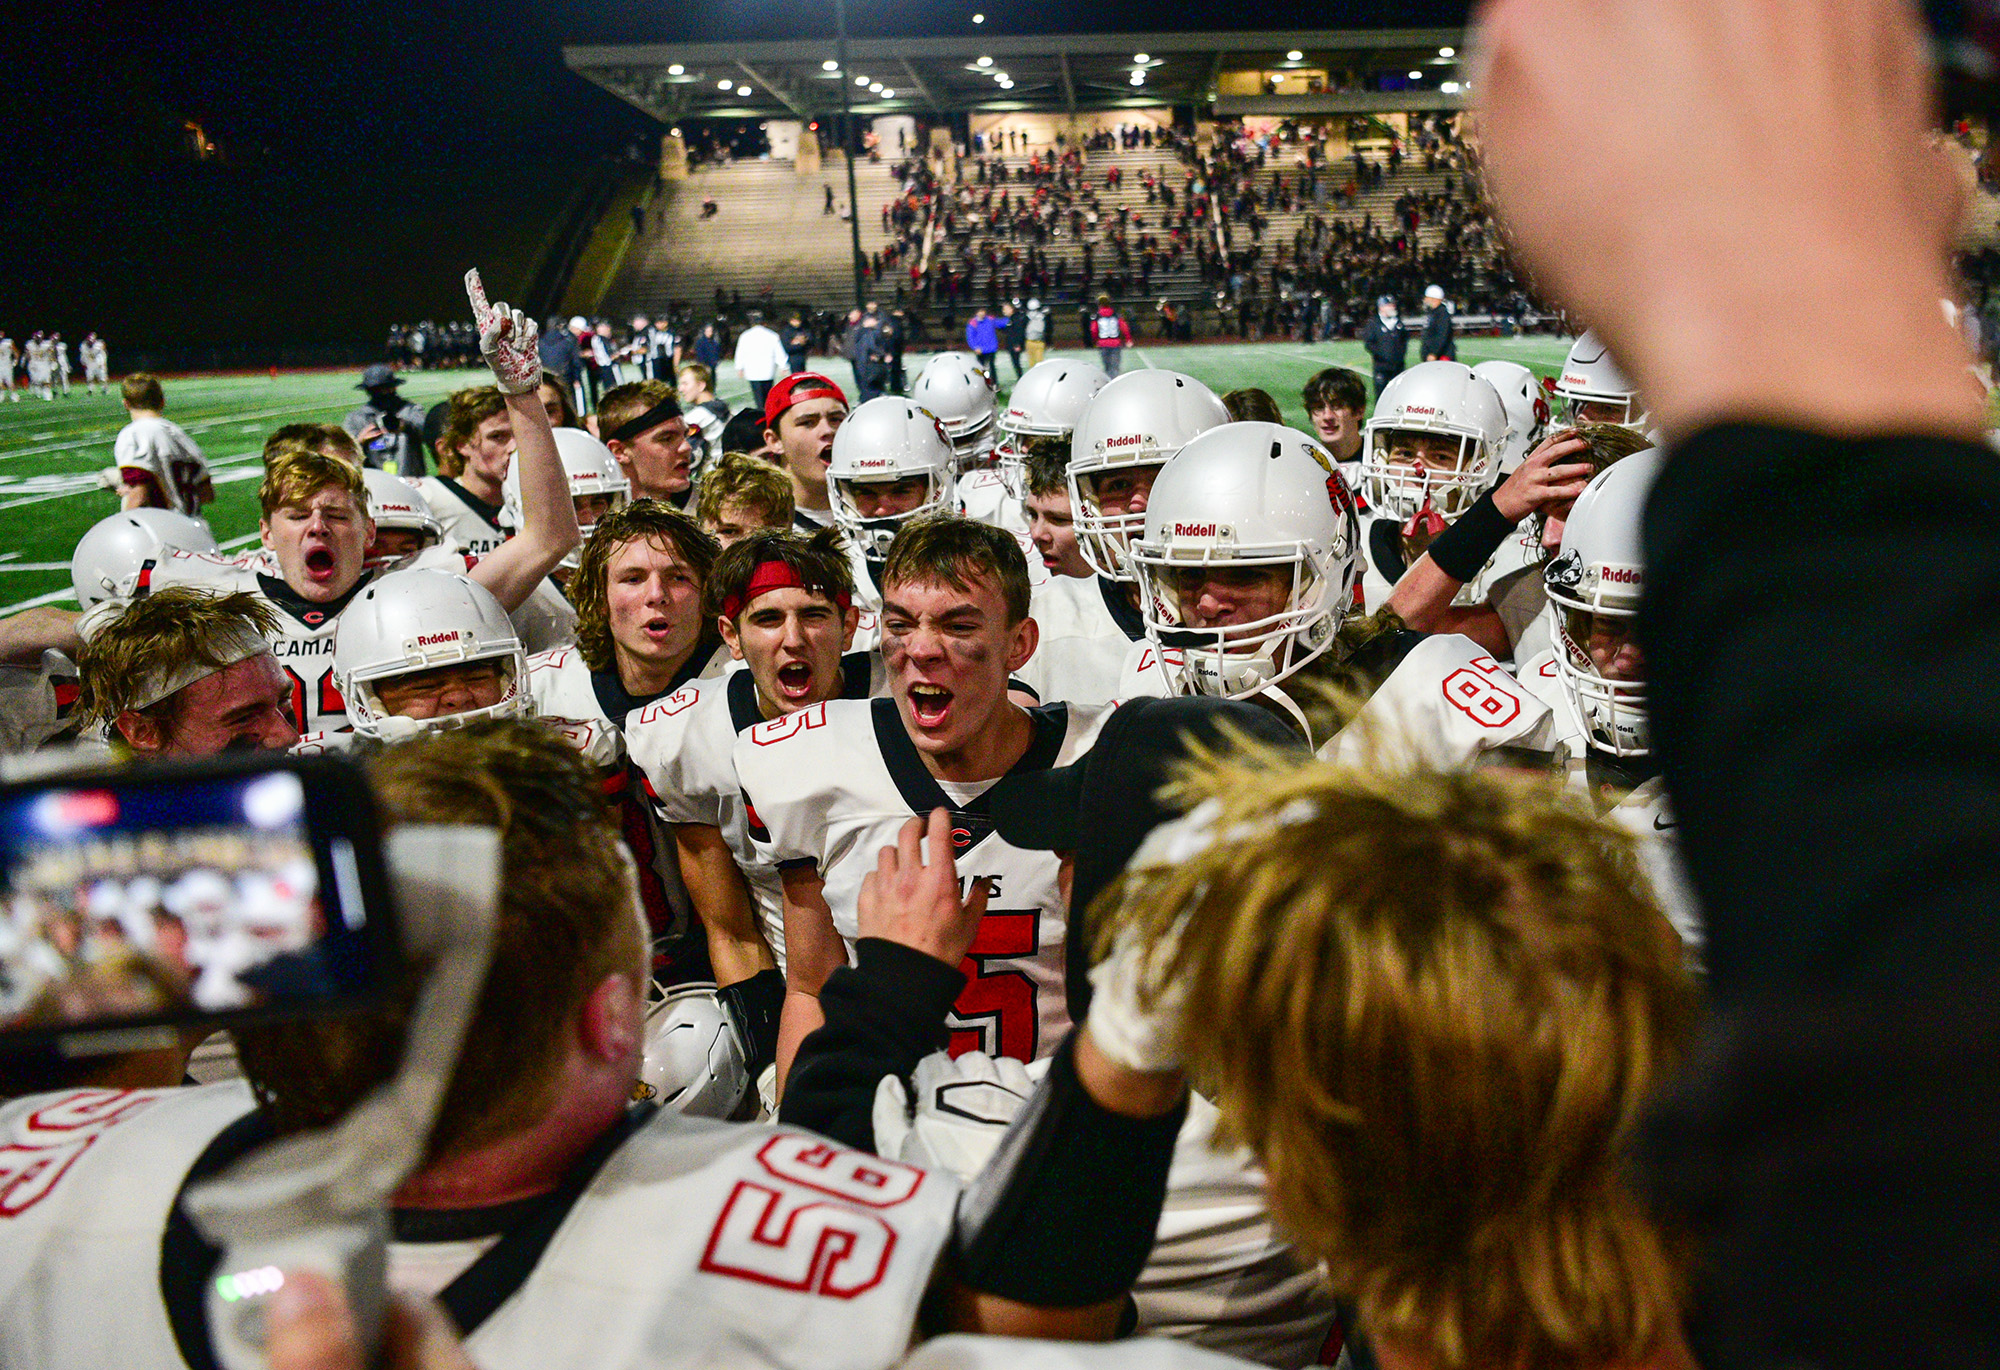 Camas players celebrate Friday, Oct. 29, 2021, following the Papermakers’ 17-7 win against Union at McKenzie Stadium in Vancouver.